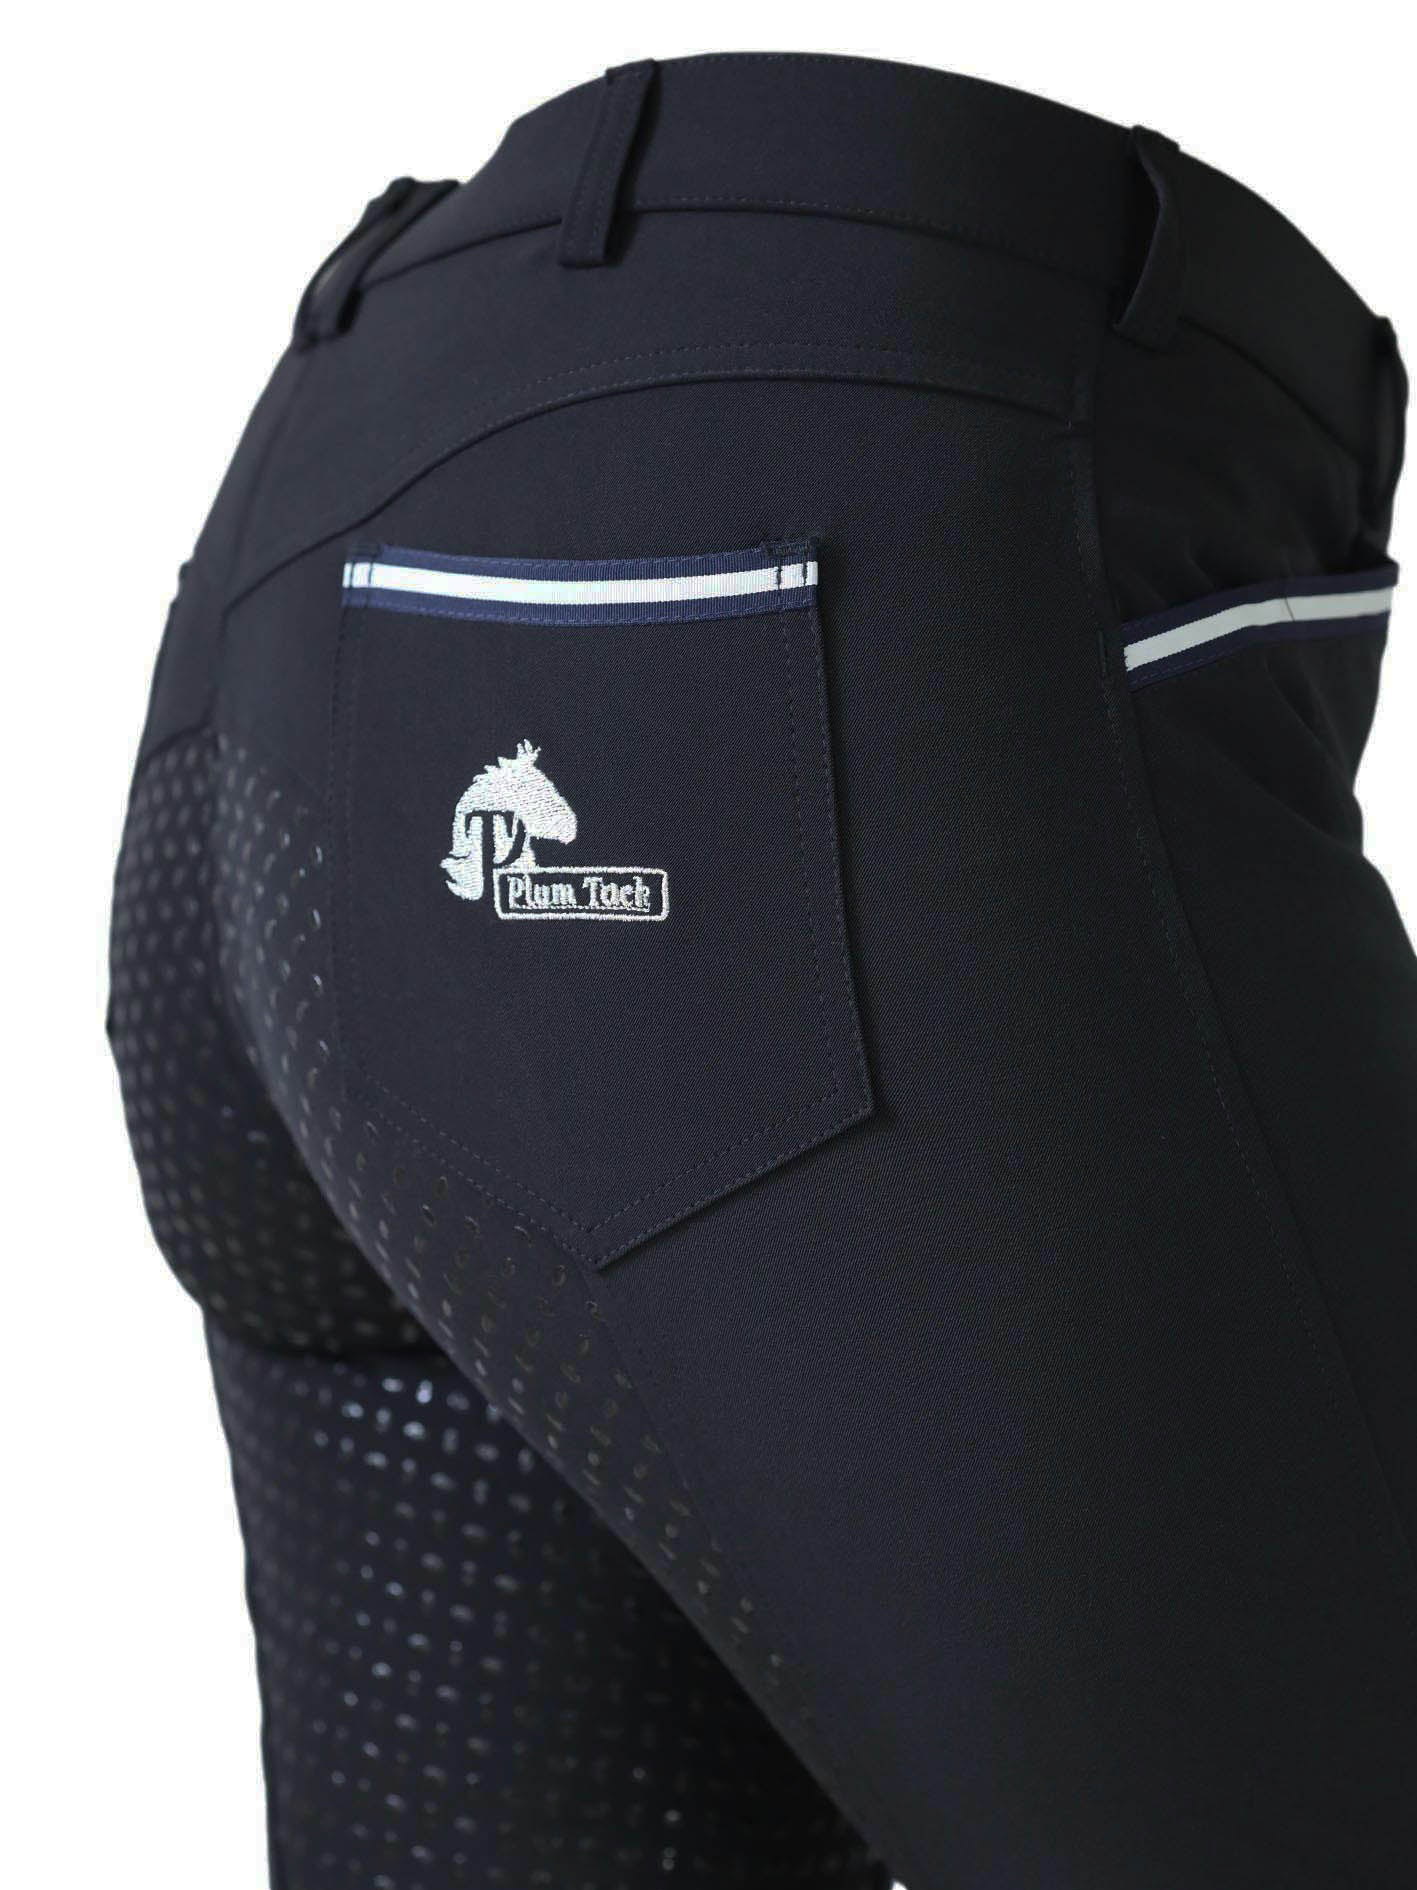 CoolMax Black Breeches in sizes 6 to 28 - With Silicone Seat Grip